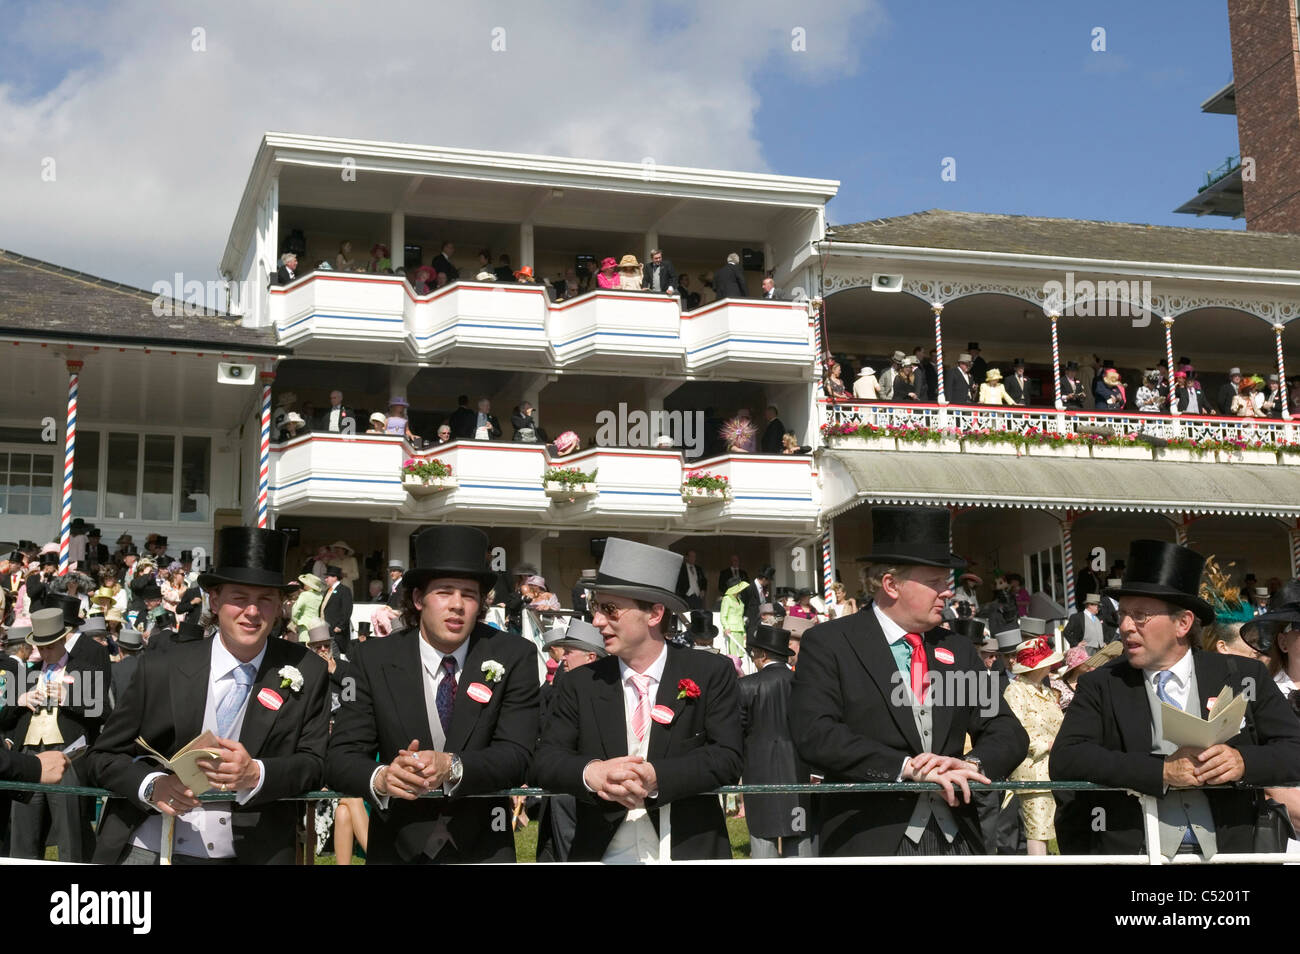 Race day for Royal Ascot when it was located at York during the refurbishment of the Ascot racecourse. York. Stock Photo